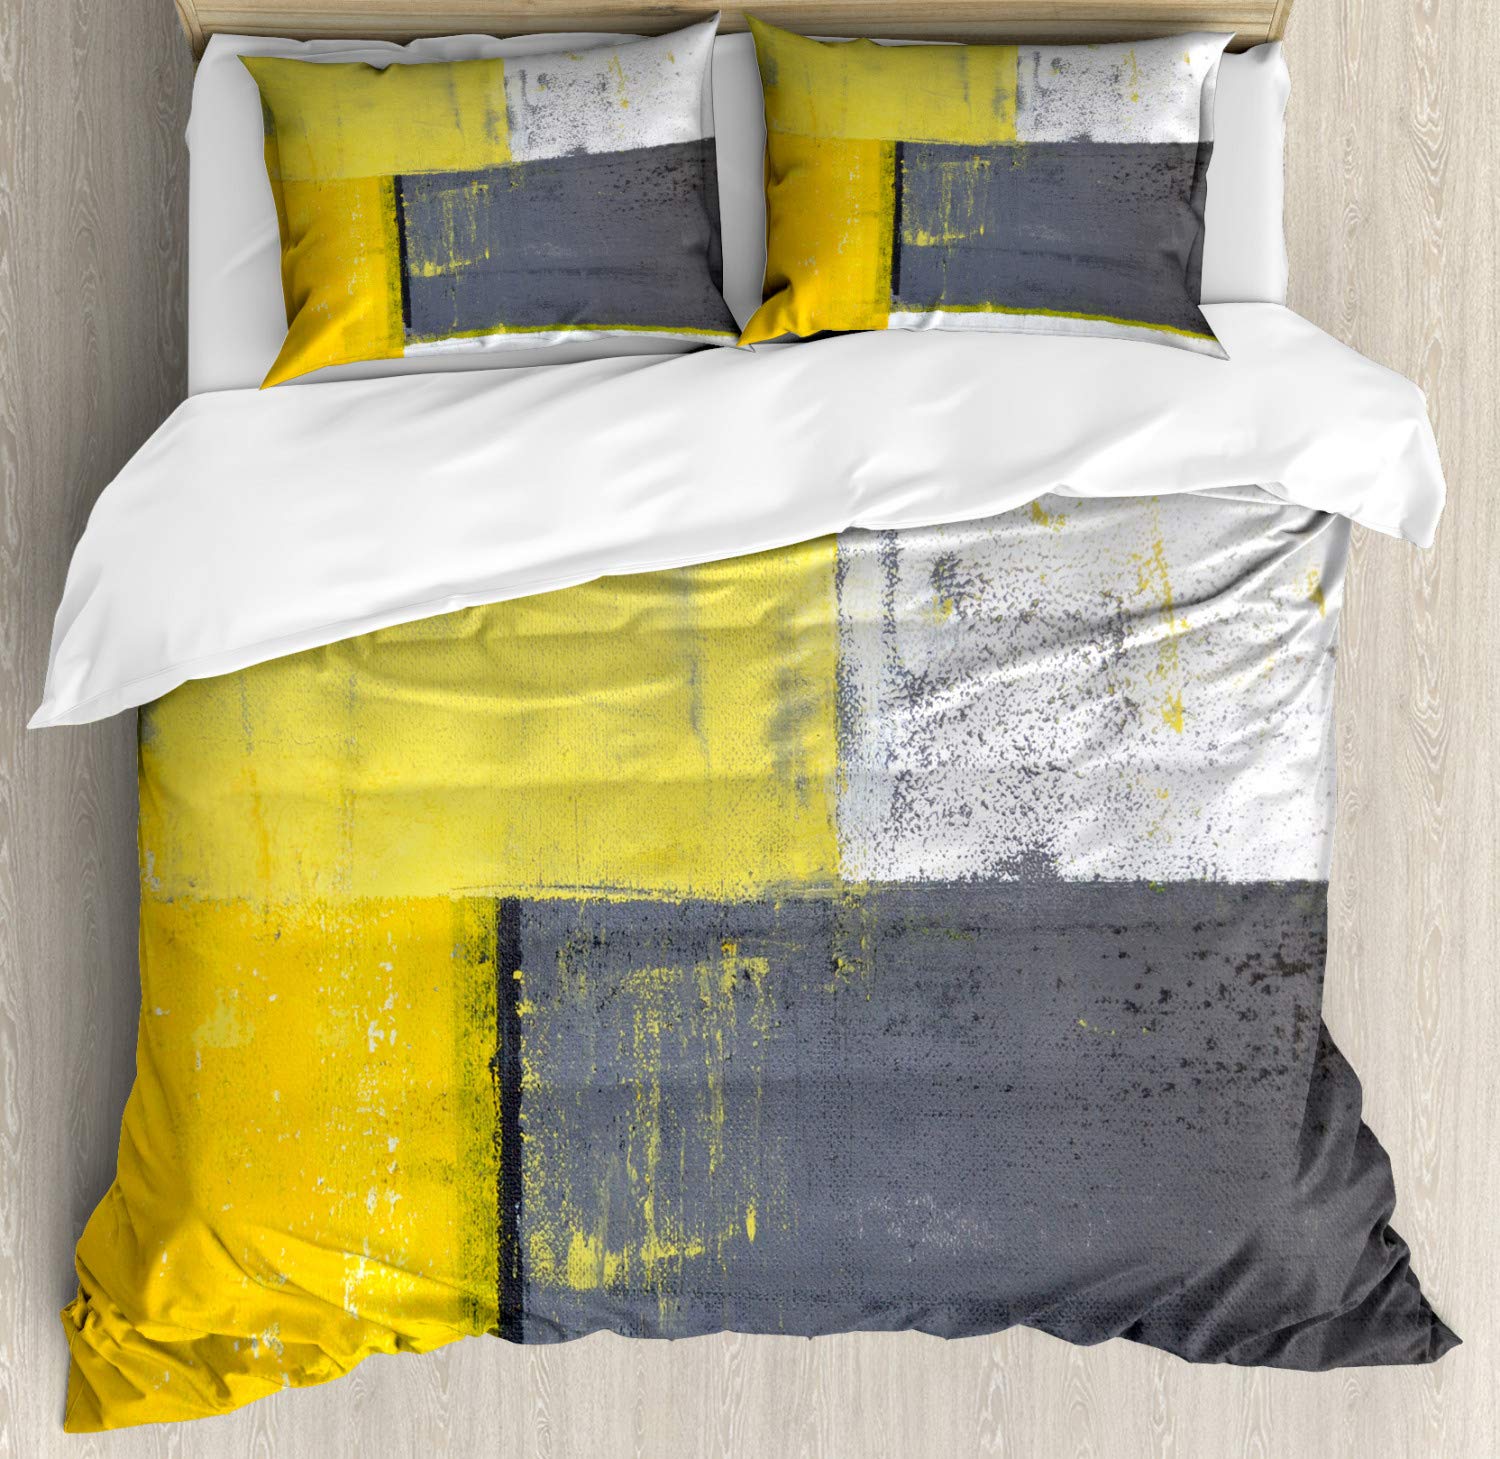 FULL QUEEN Multi 1 - Grey and Yellow Duvet Cover Set by Ambesonne Street Art Modern Grunge Abstract Design Squares 3 P